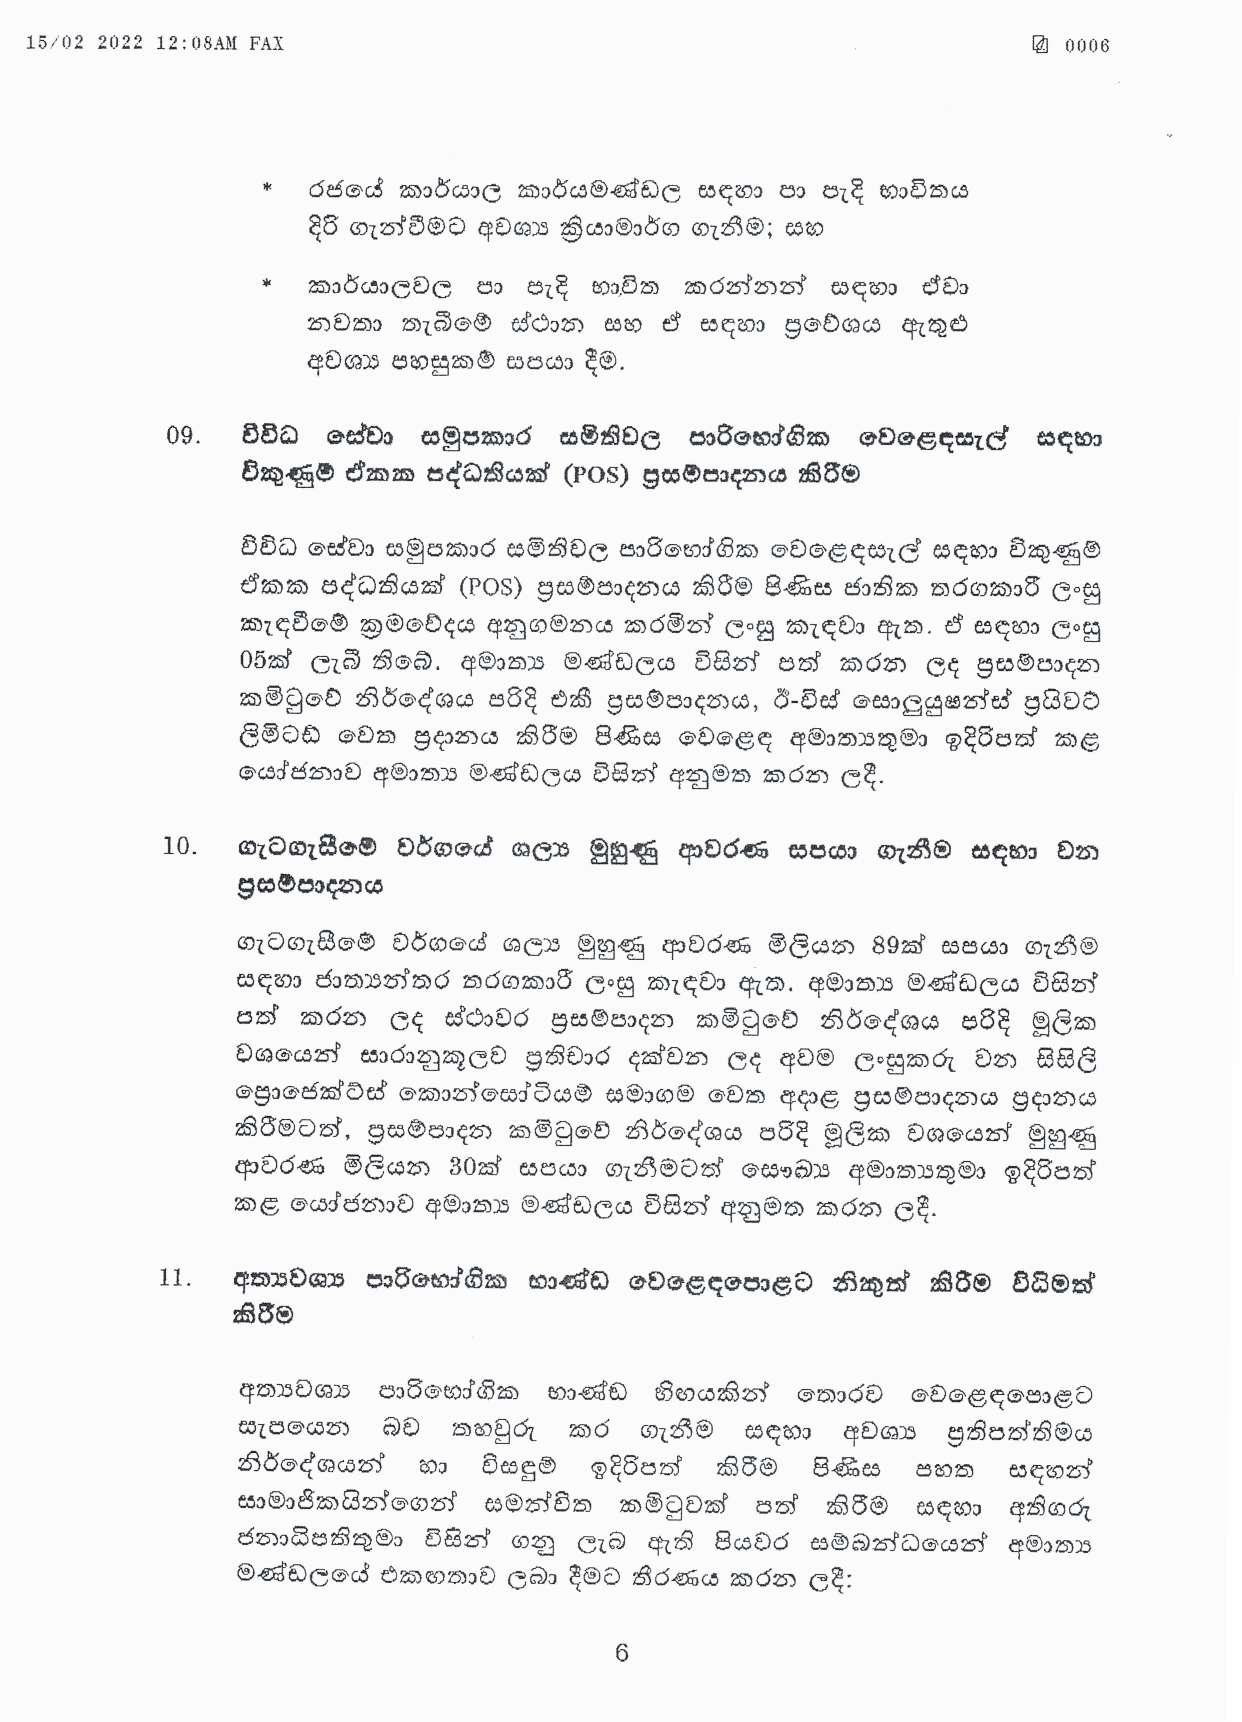 Cabinet Decision on 14.02.2022 page 006